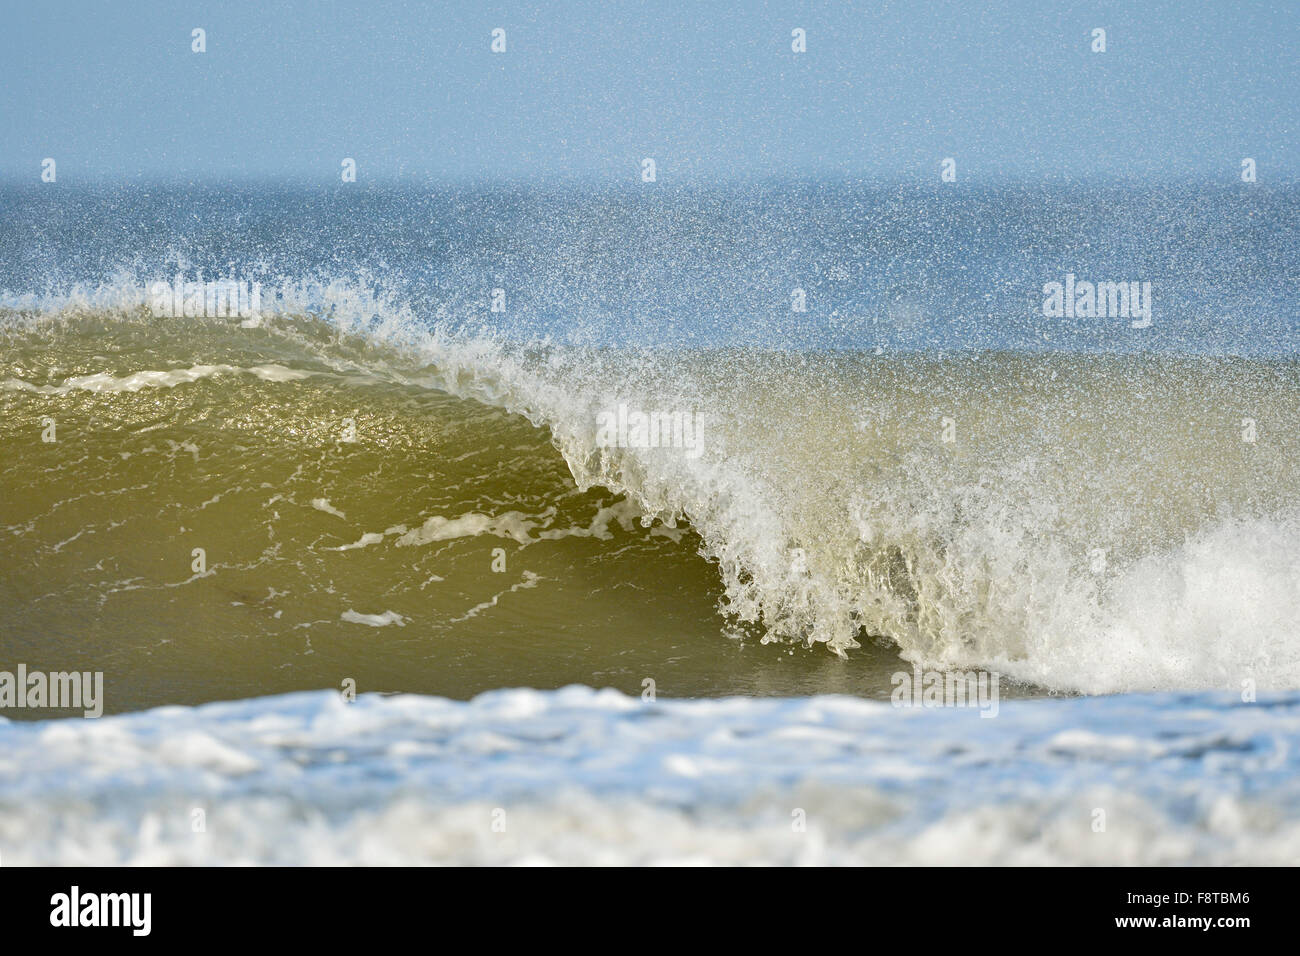 Huge wave with offshore spray crashes on the beach, sunny day at North sea, Helgoland, Germany. Stock Photo